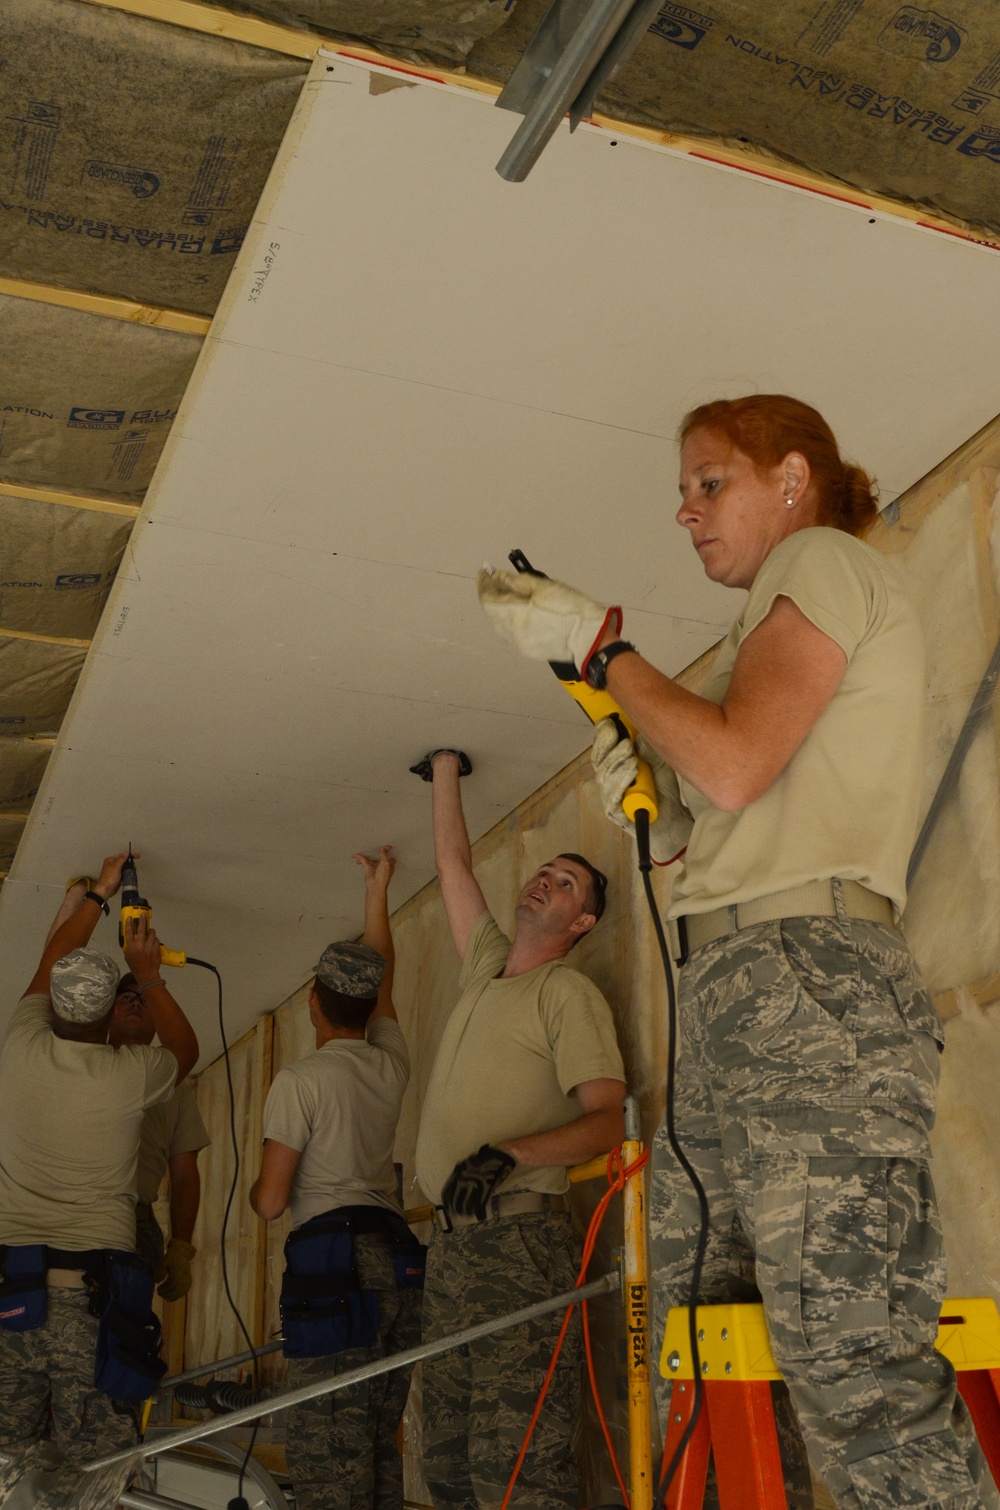 Civil Engineer airmen build camp for 'Wounded Warrior' veterans